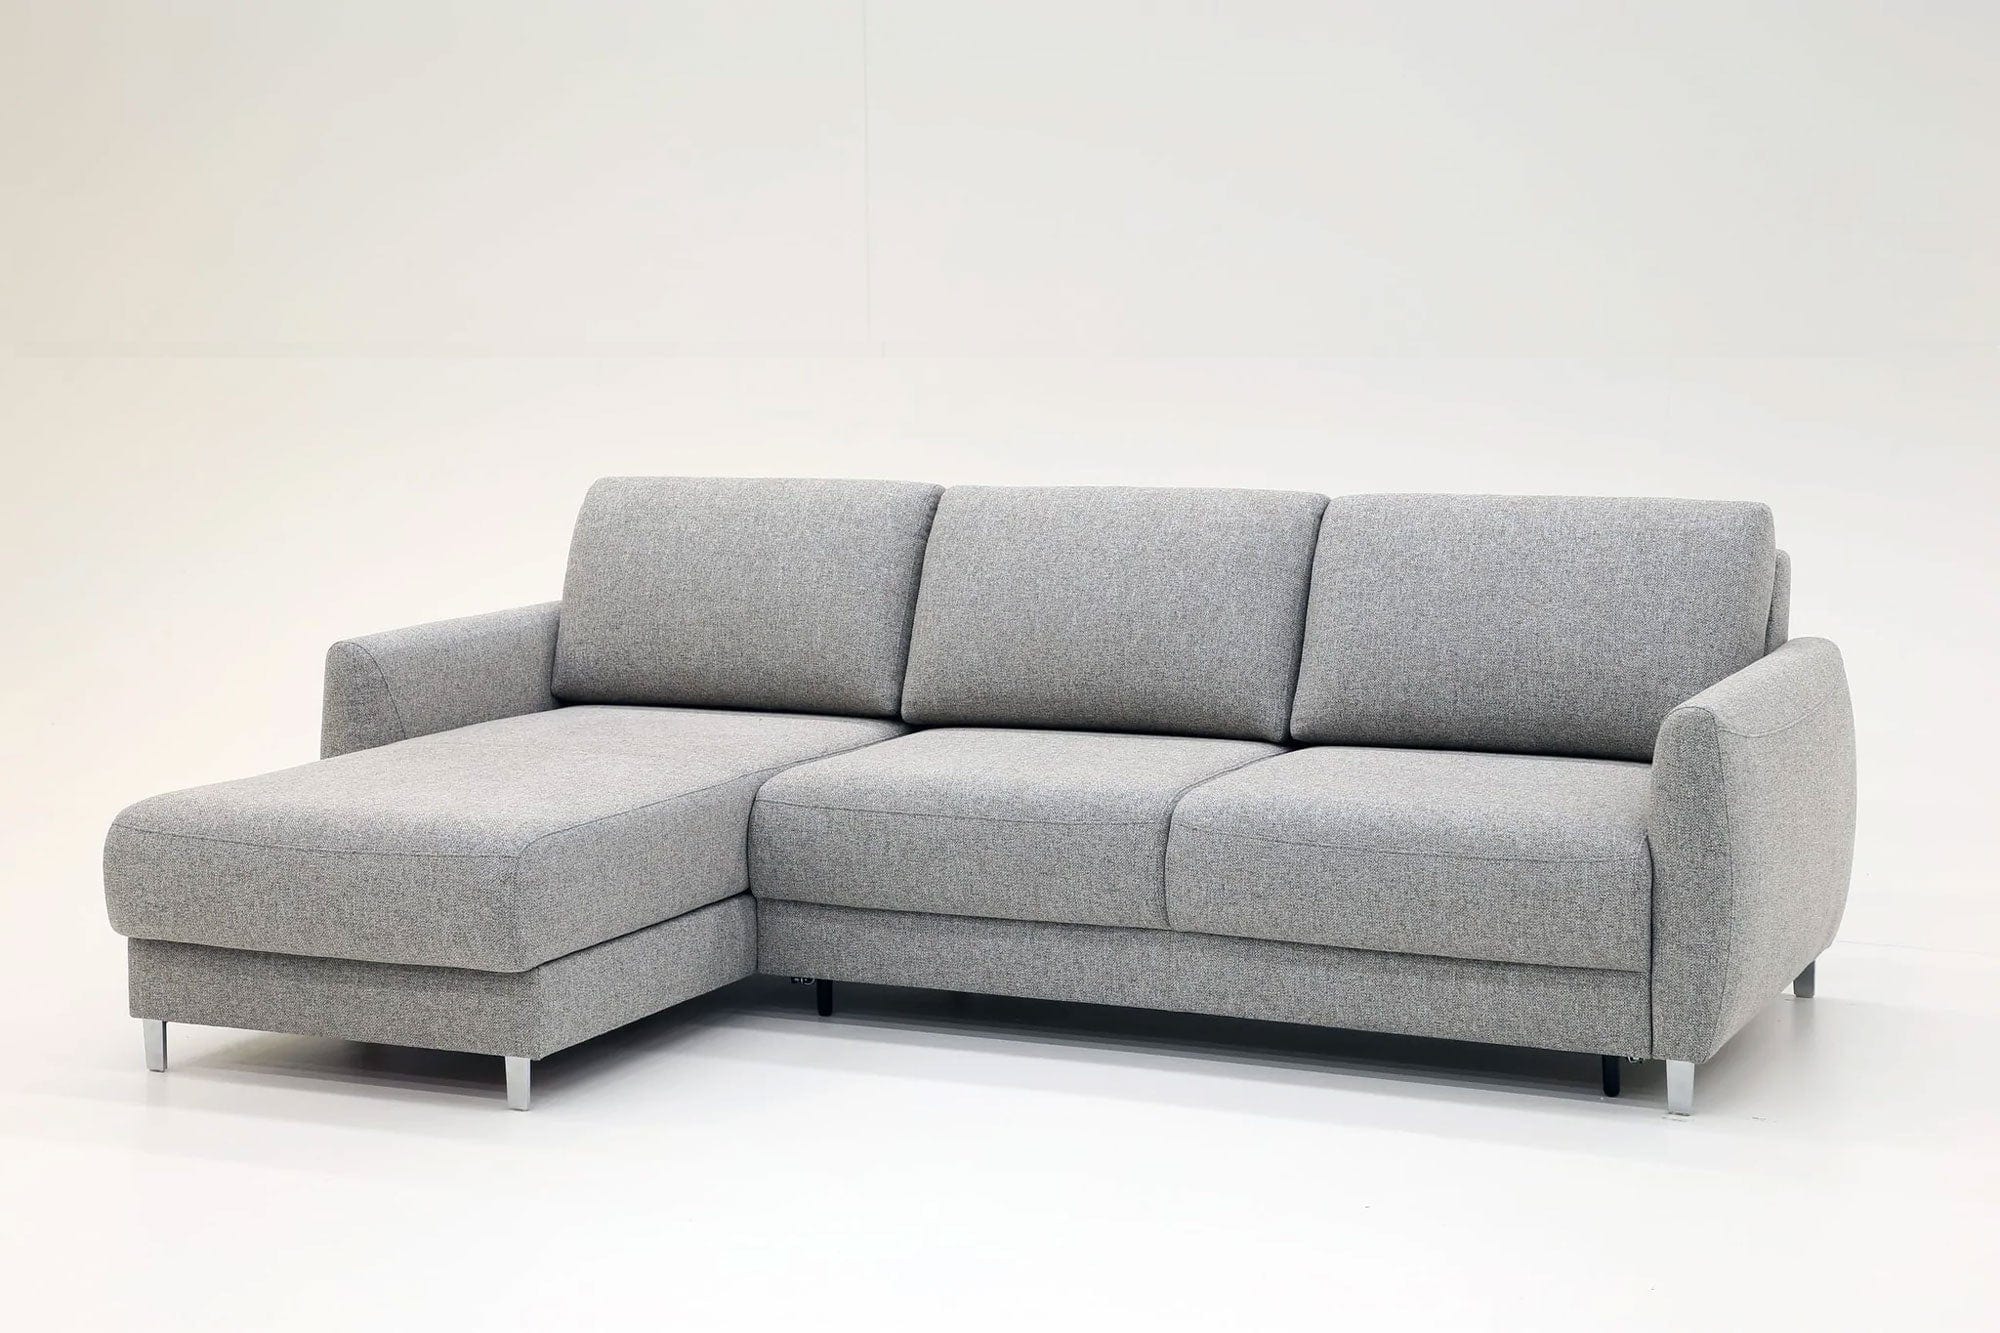 Luonto Couches & Sofa Left Hand Facing Chaise Delta Sectional Sleeper | Luonto